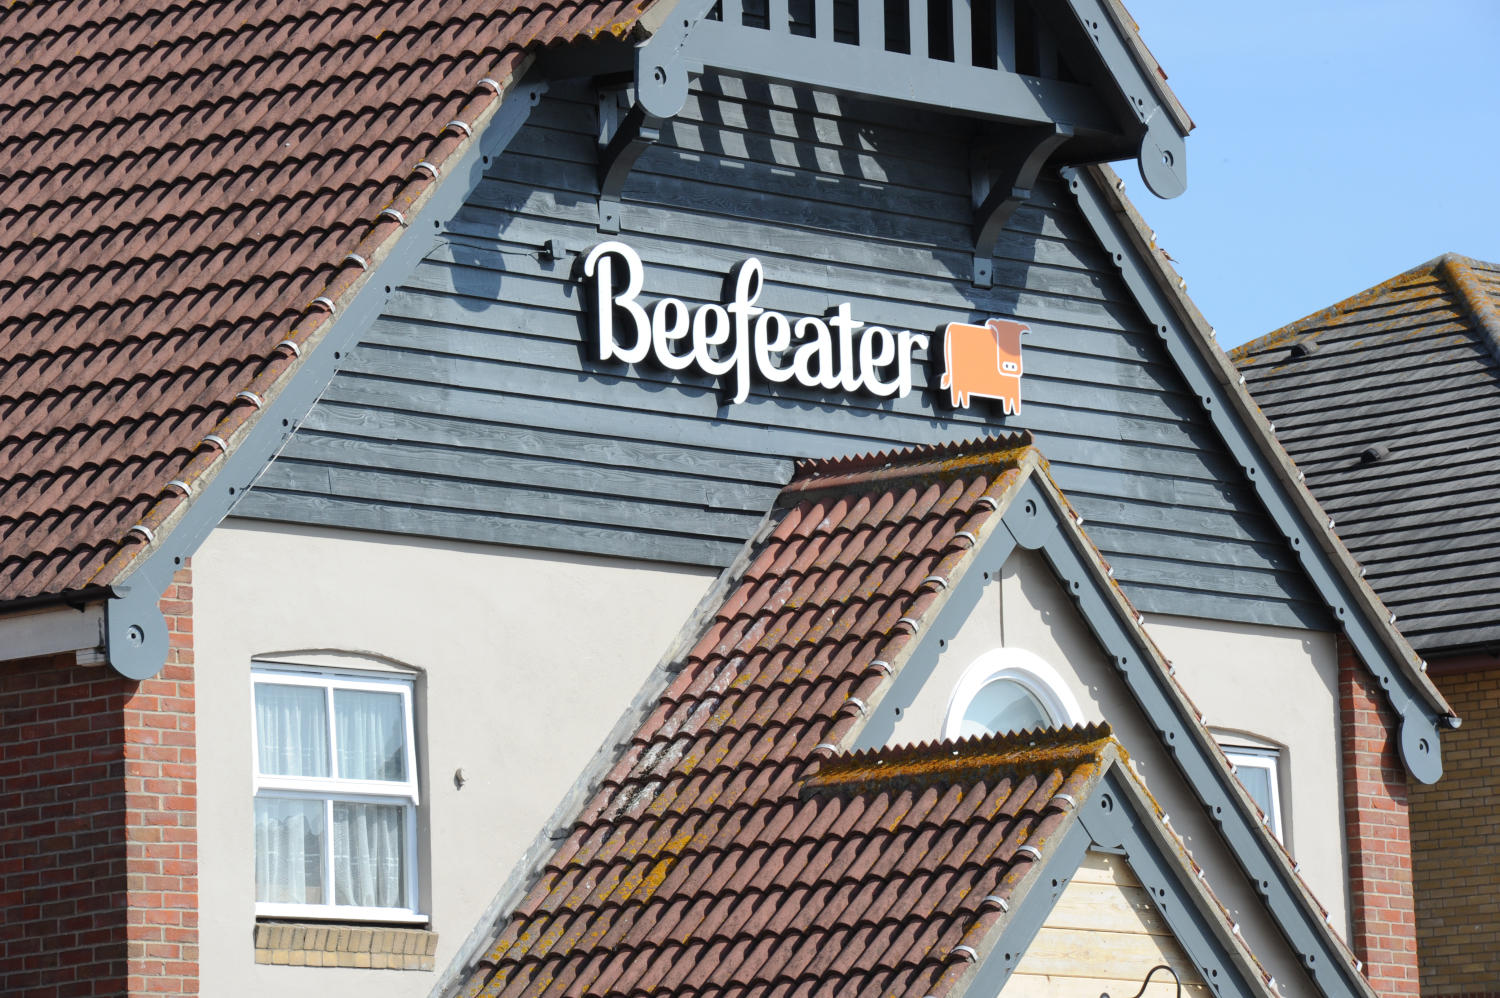 Beefeater restaurant Premier Inn Southend Airport hotel Southend-on-Sea 03333 219014